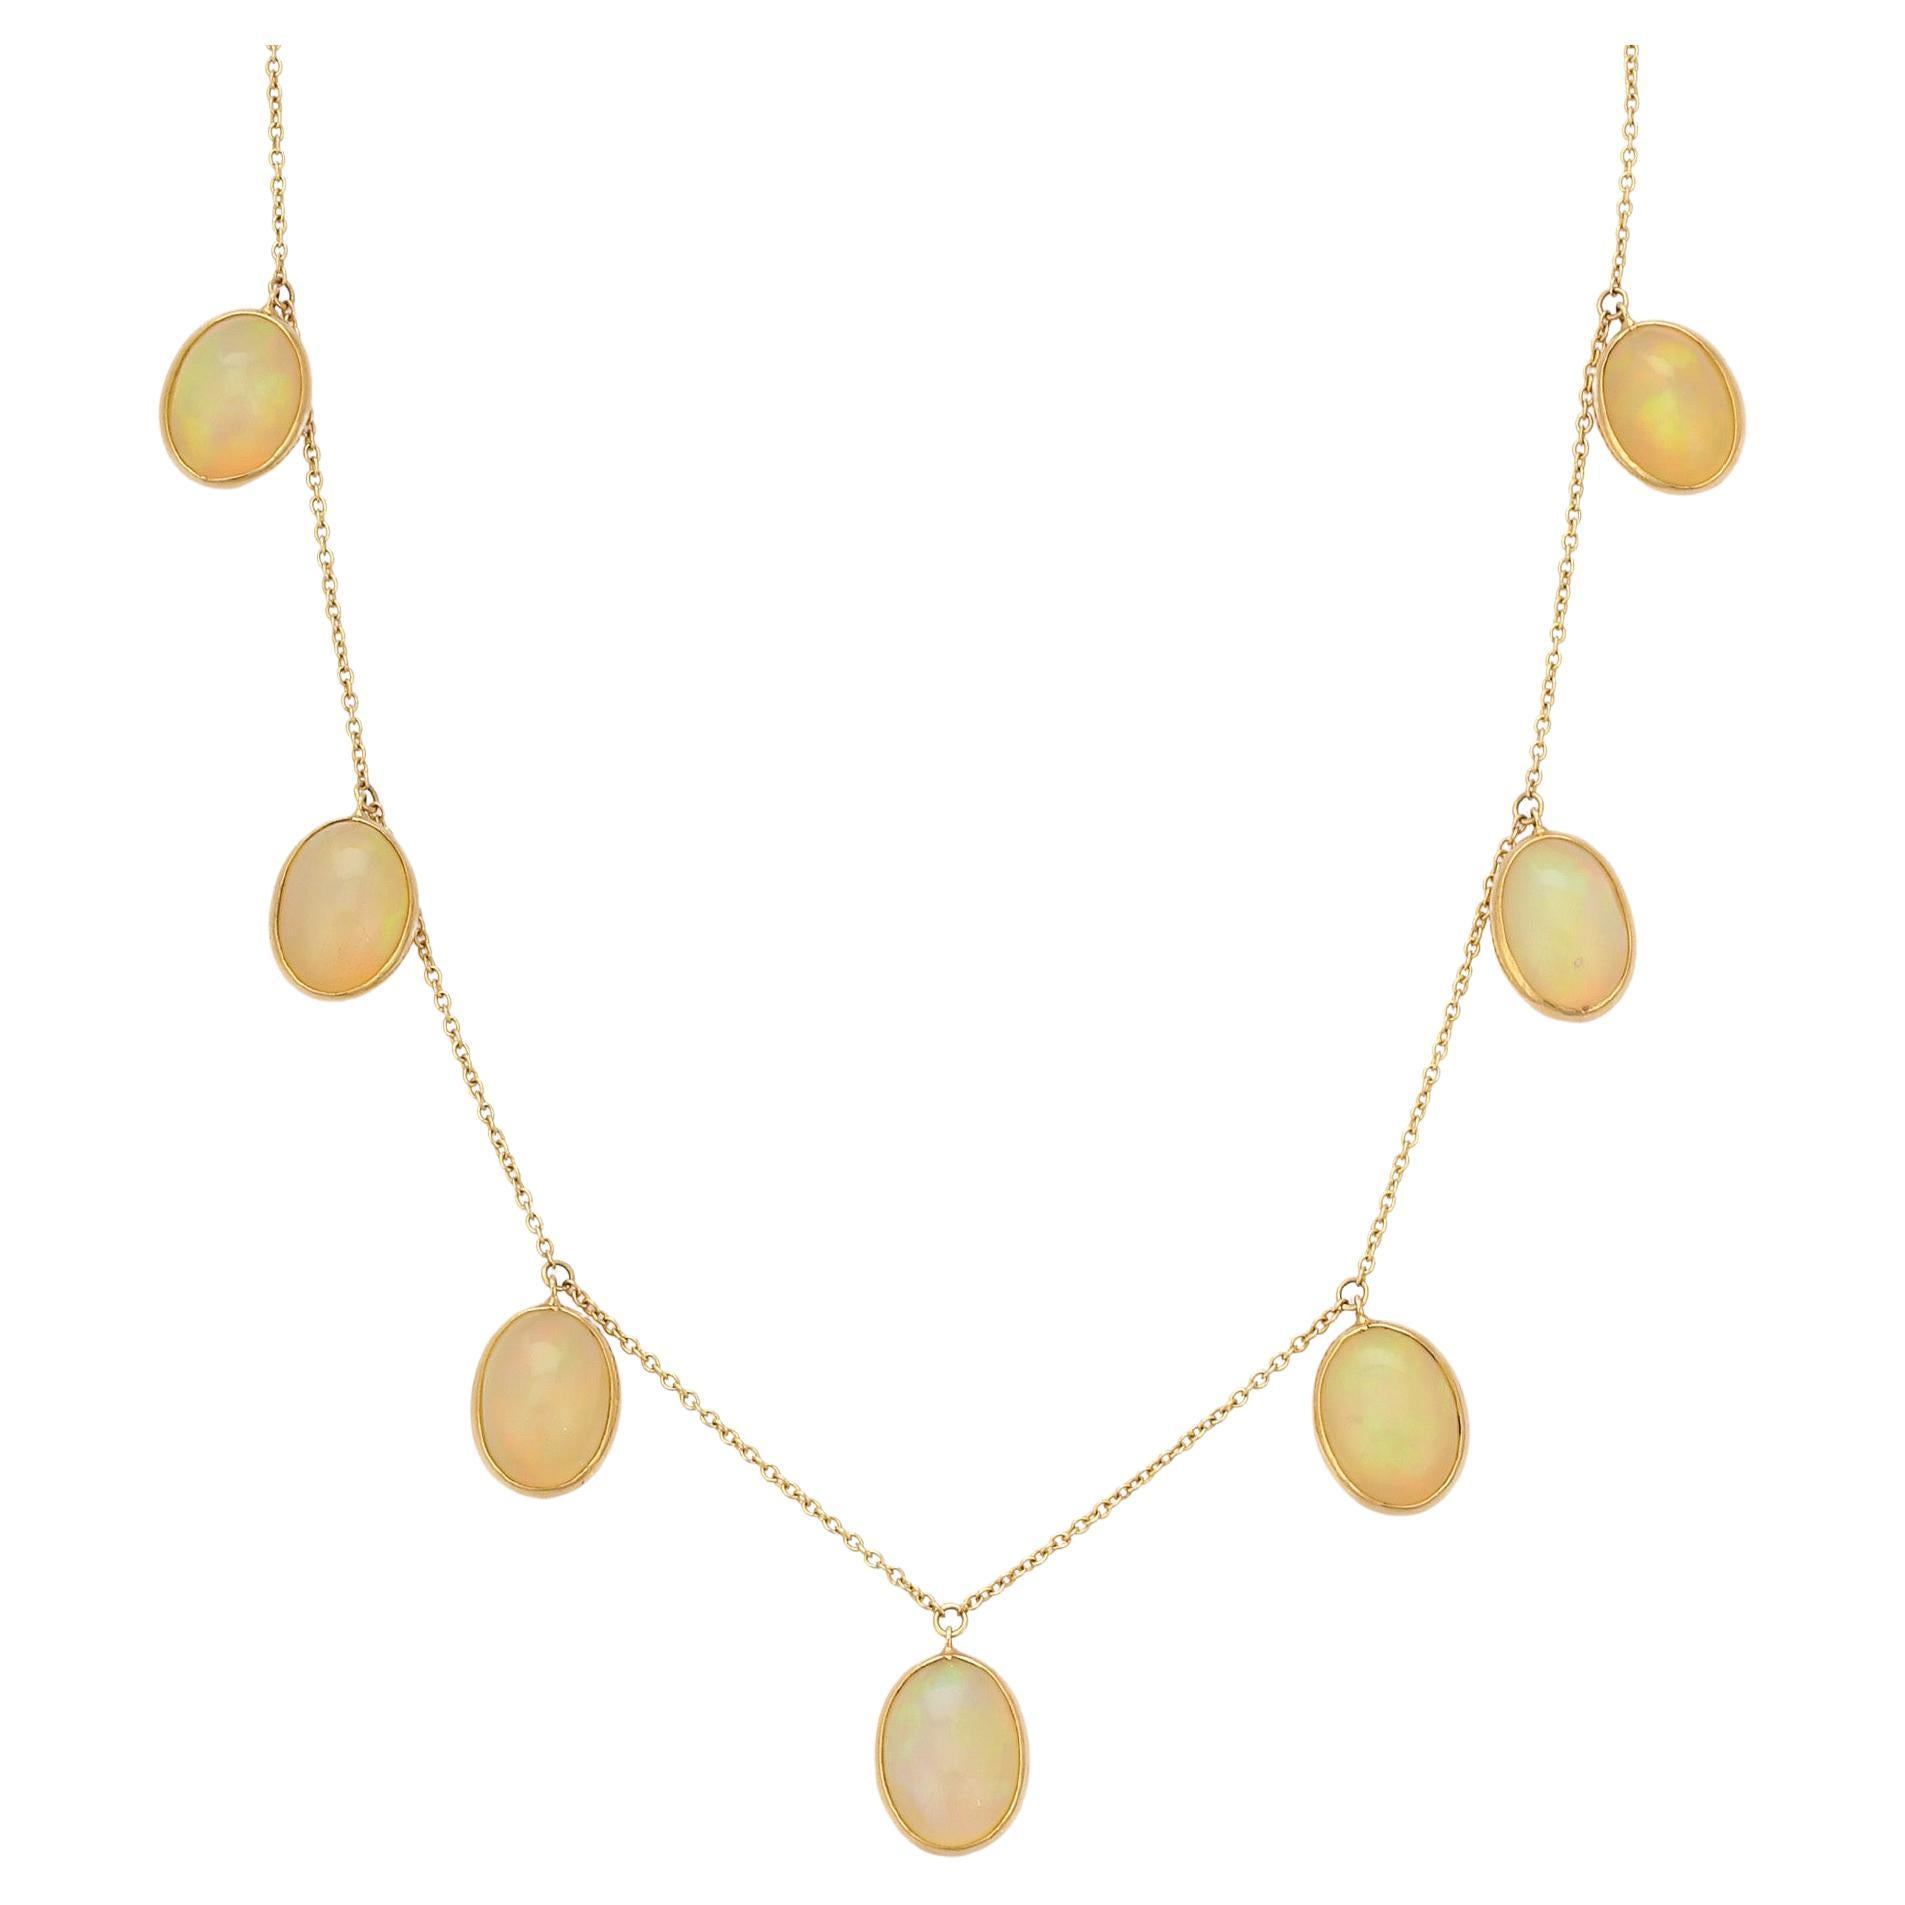 16.7 Ct Opal Necklace in 18K Yellow Gold Chain For Sale